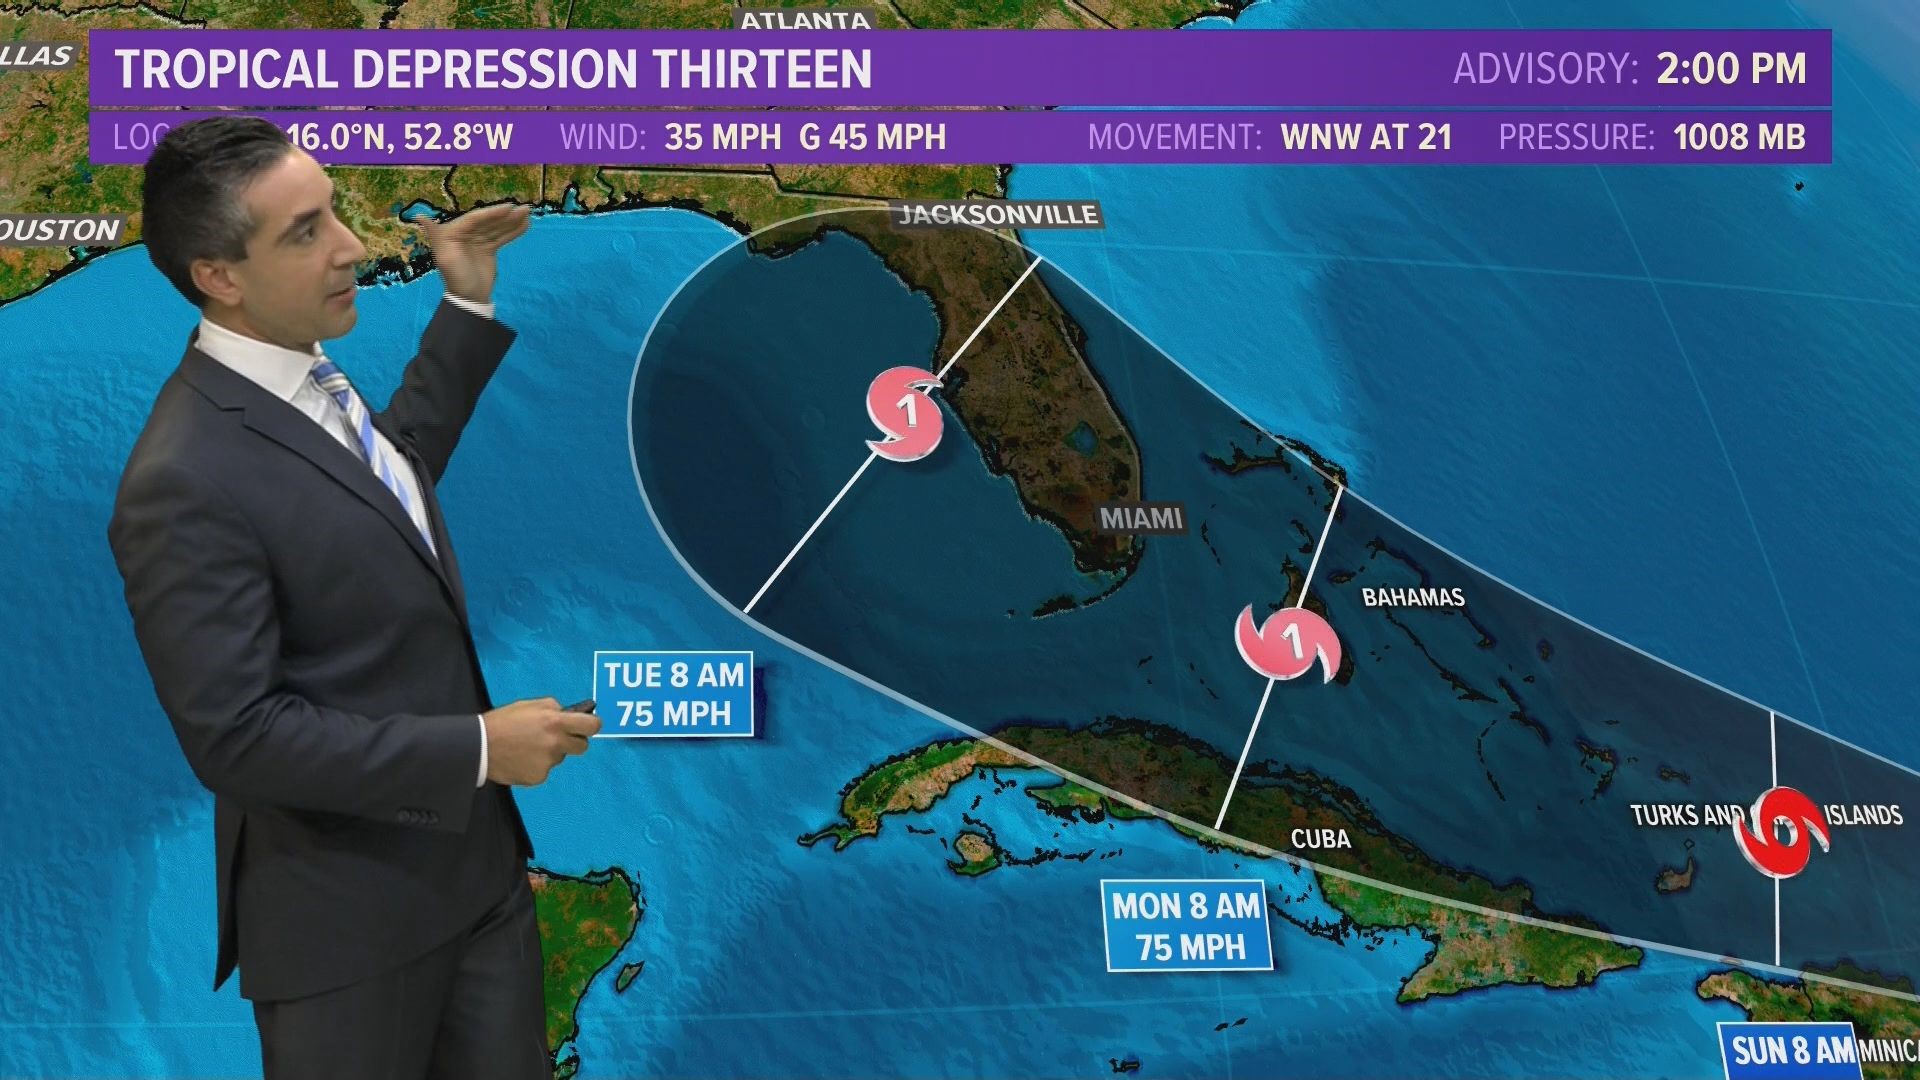 13News Now Meteorologist Tim Pandajis gives a tropics update for Thursday, August 20, 2020.